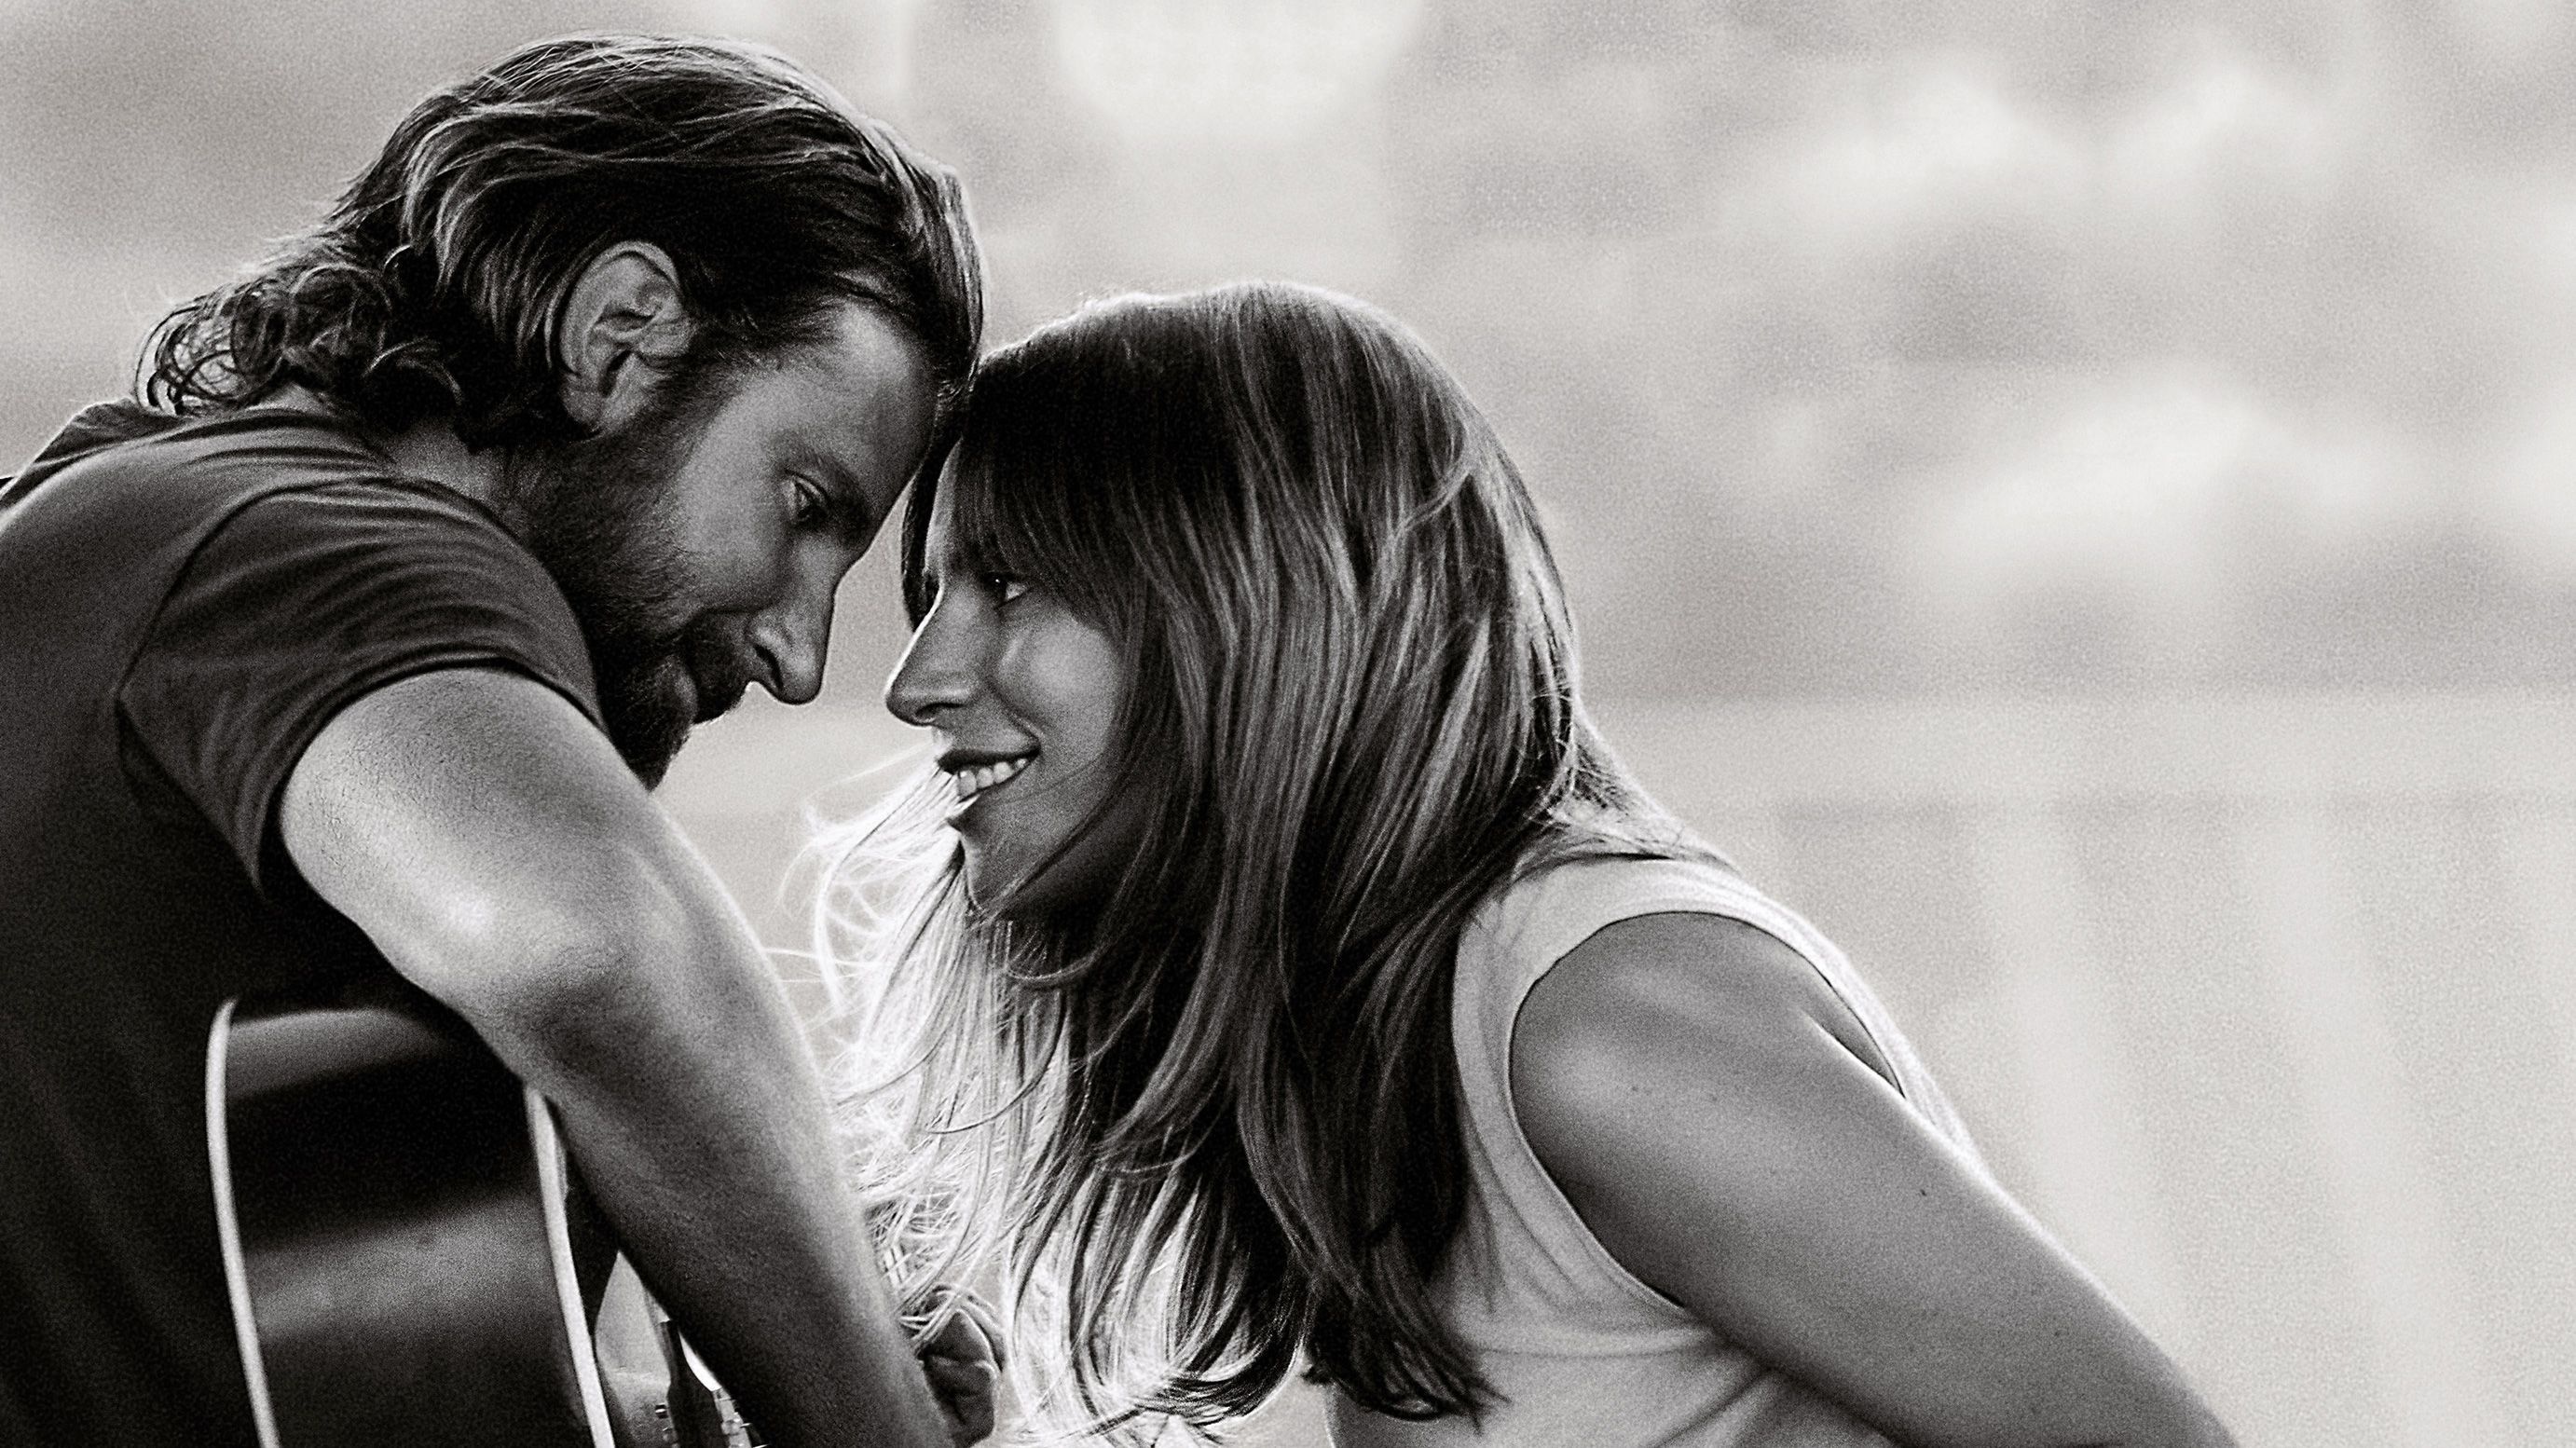 A Star Is Born: Musician Jackson Maine (Bradley Cooper) discovers-and falls in love with-struggling artist Ally (Gaga). 2770x1560 HD Wallpaper.